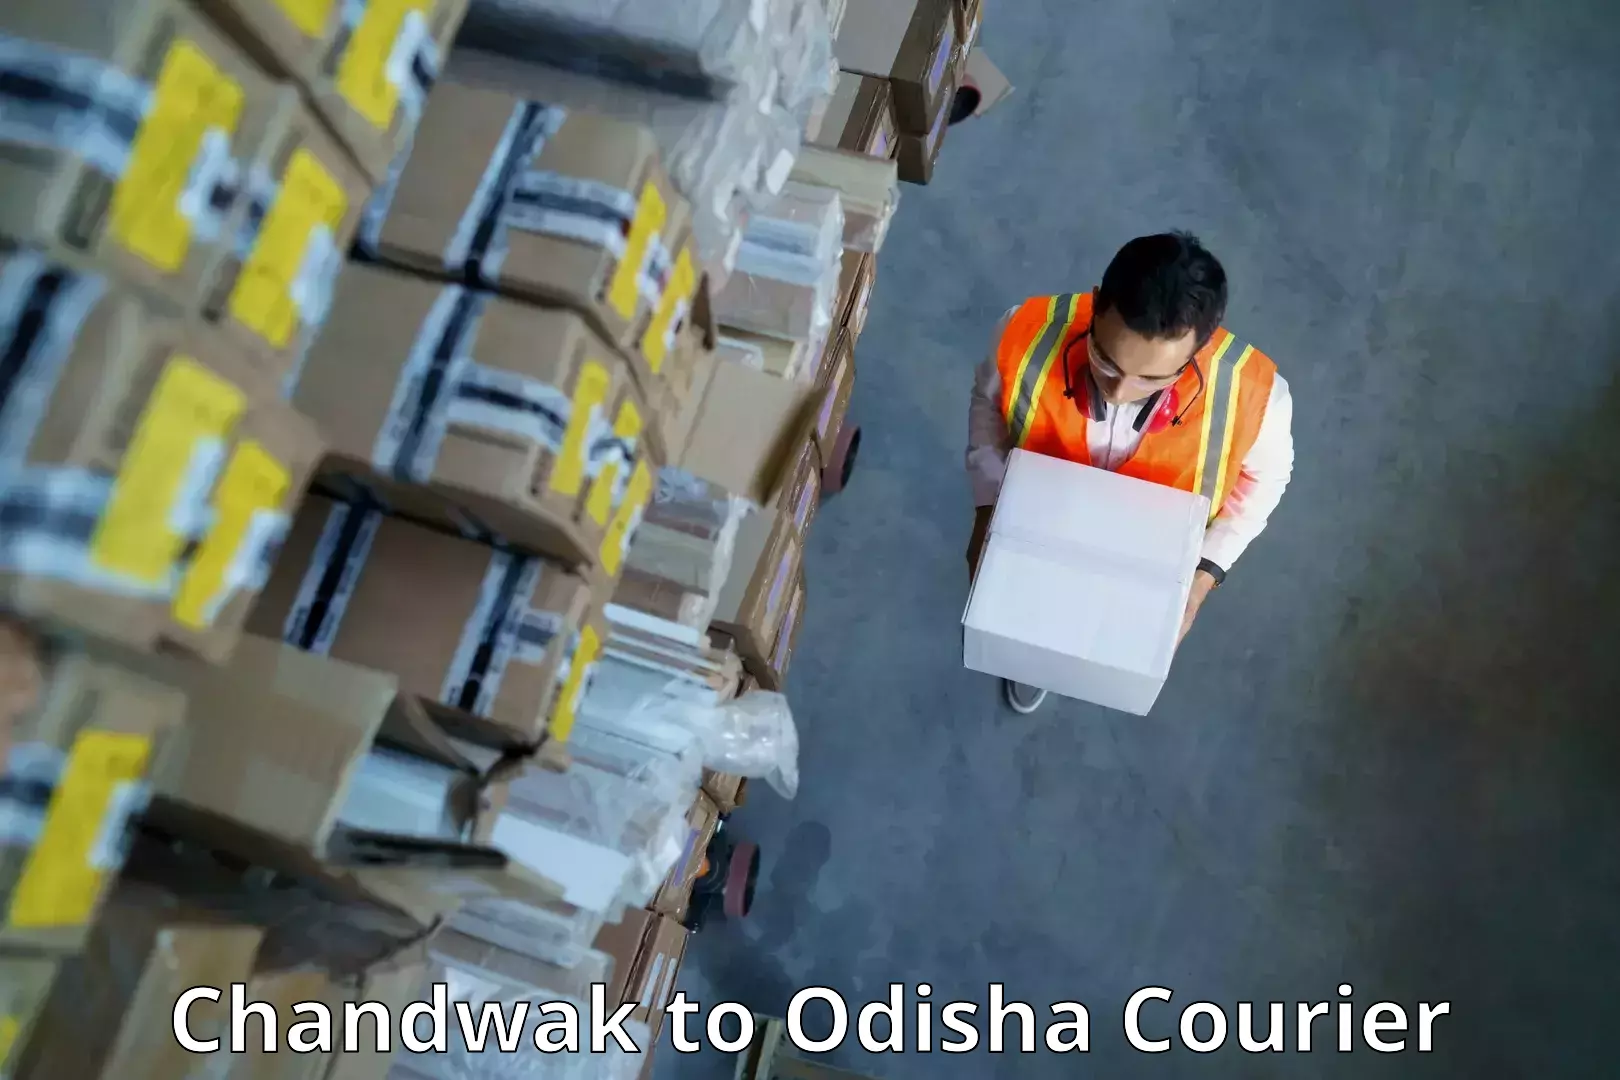 Flexible delivery scheduling in Chandwak to Chandbali